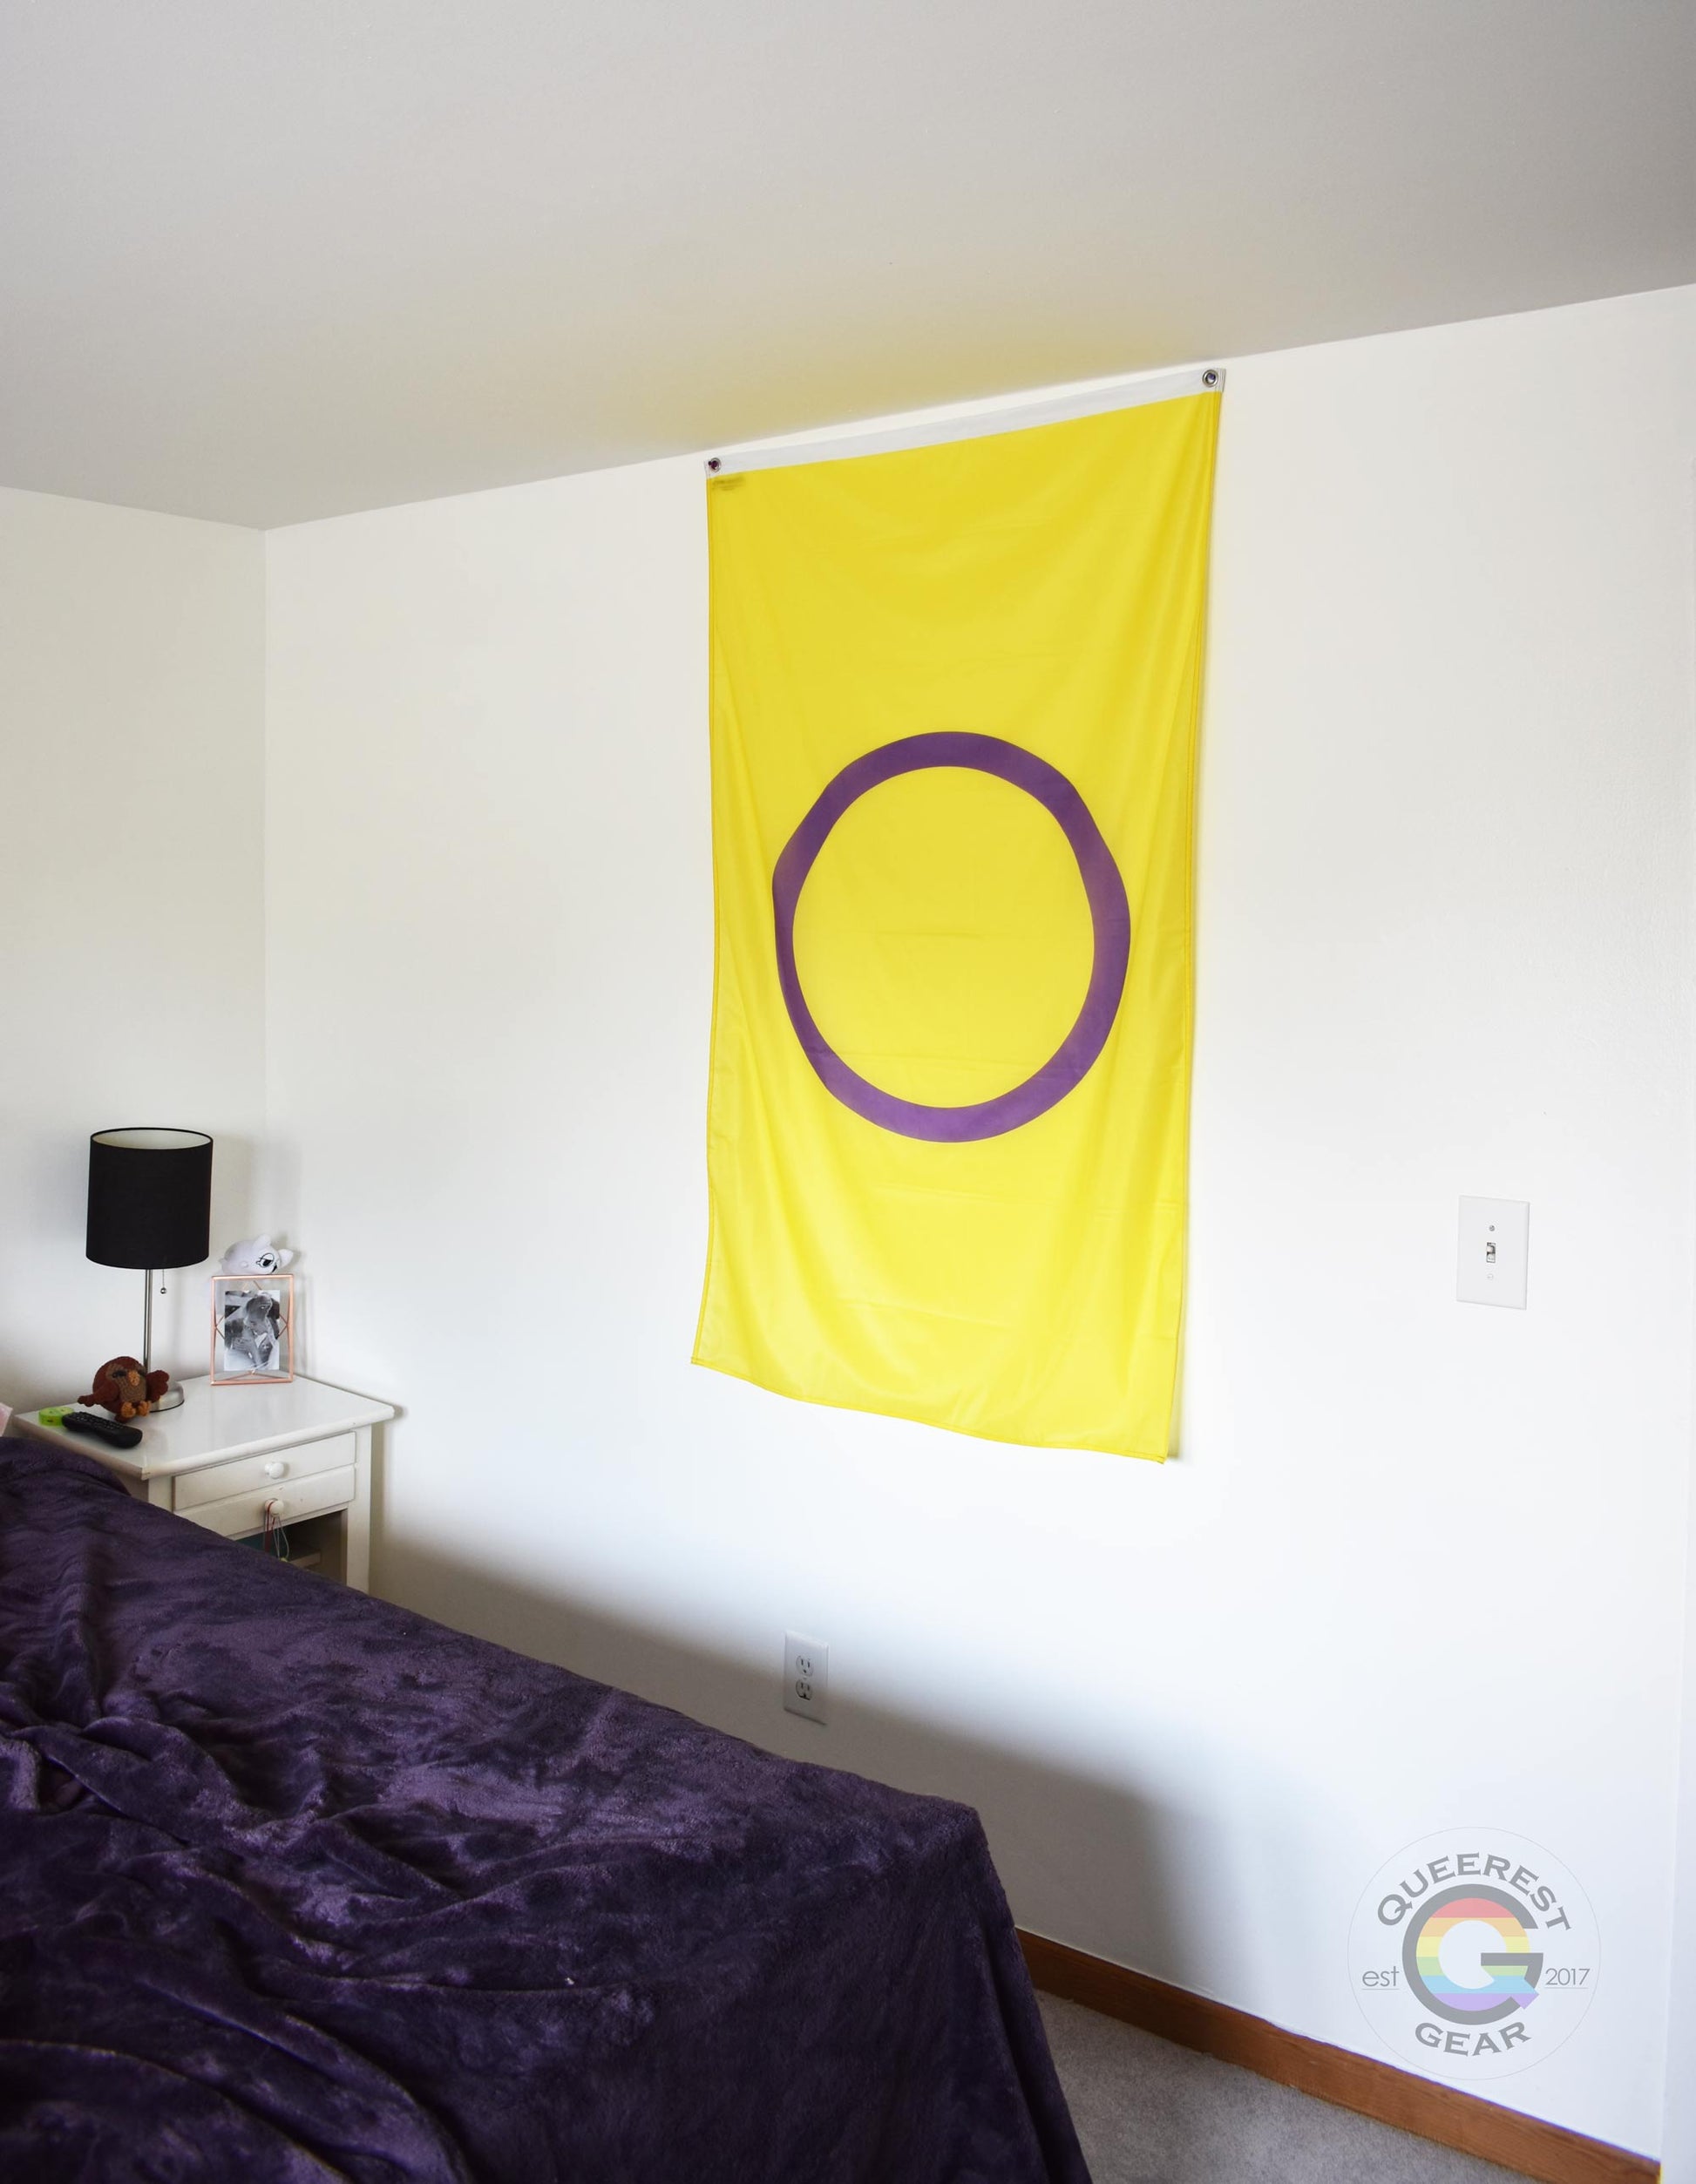 3’x5’ intersex flag hanging vertically on the wall of a bedroom with a nightstand and a bed